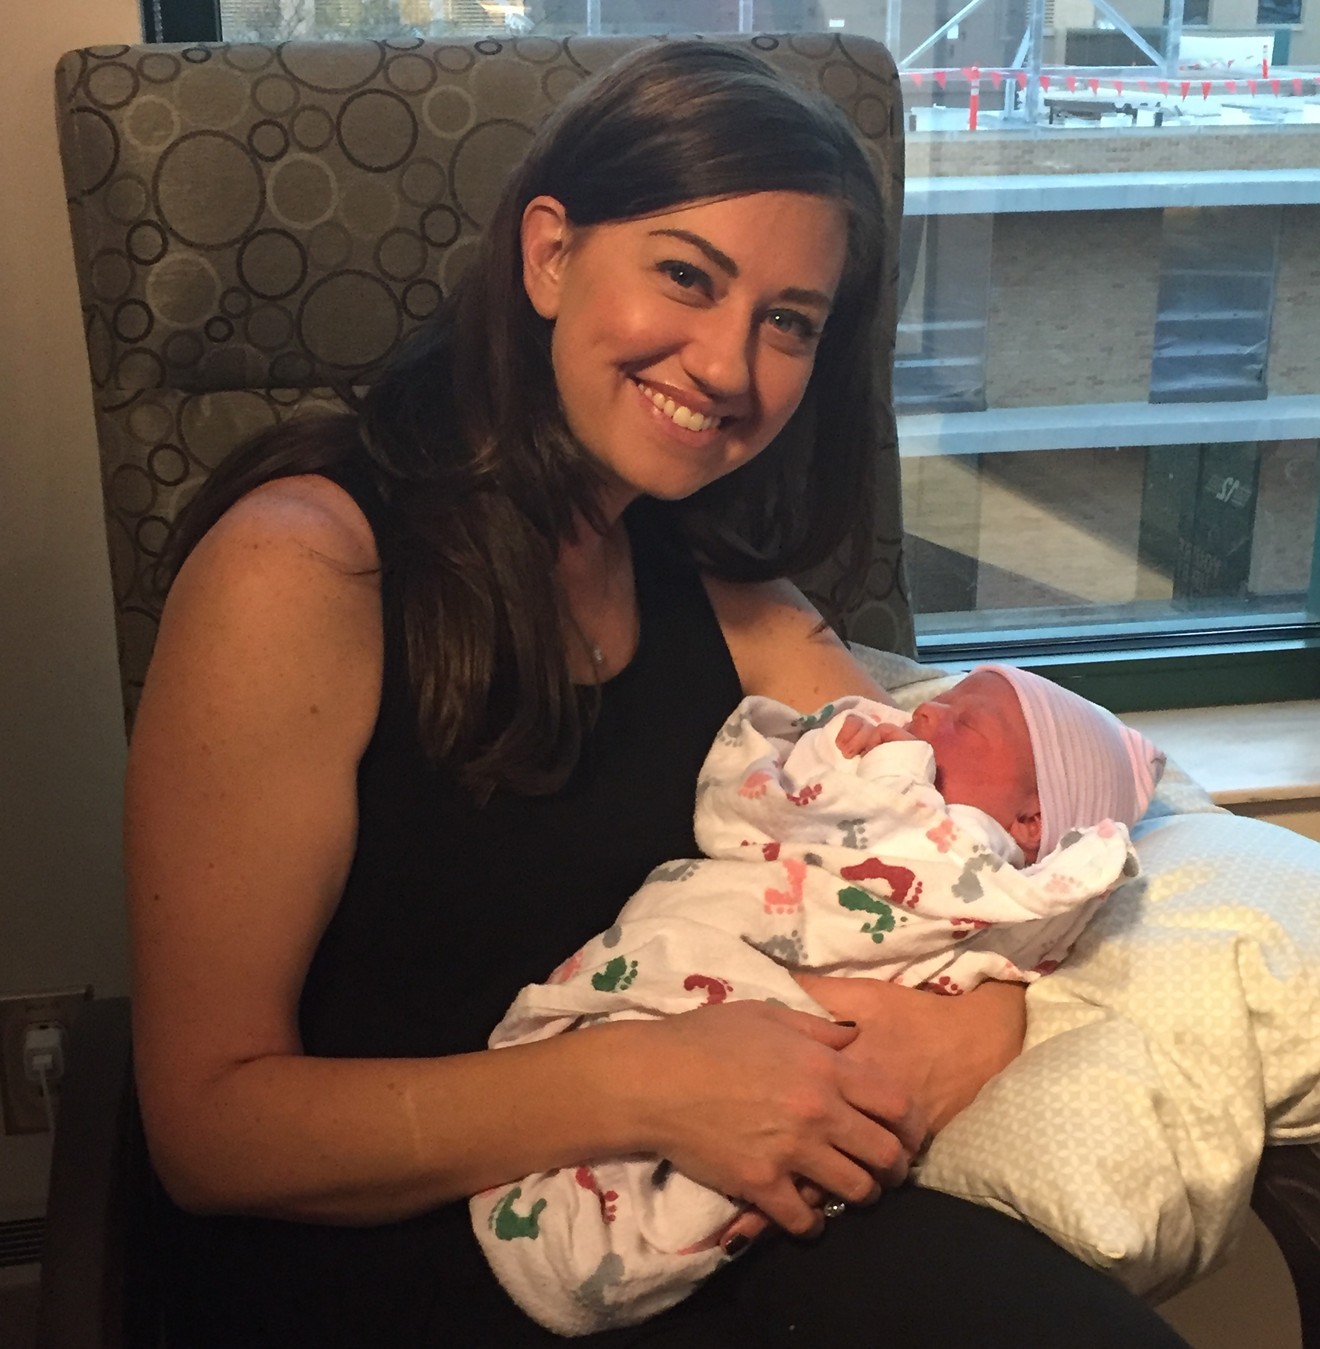 Kathleen Petrocco with her sister's child.